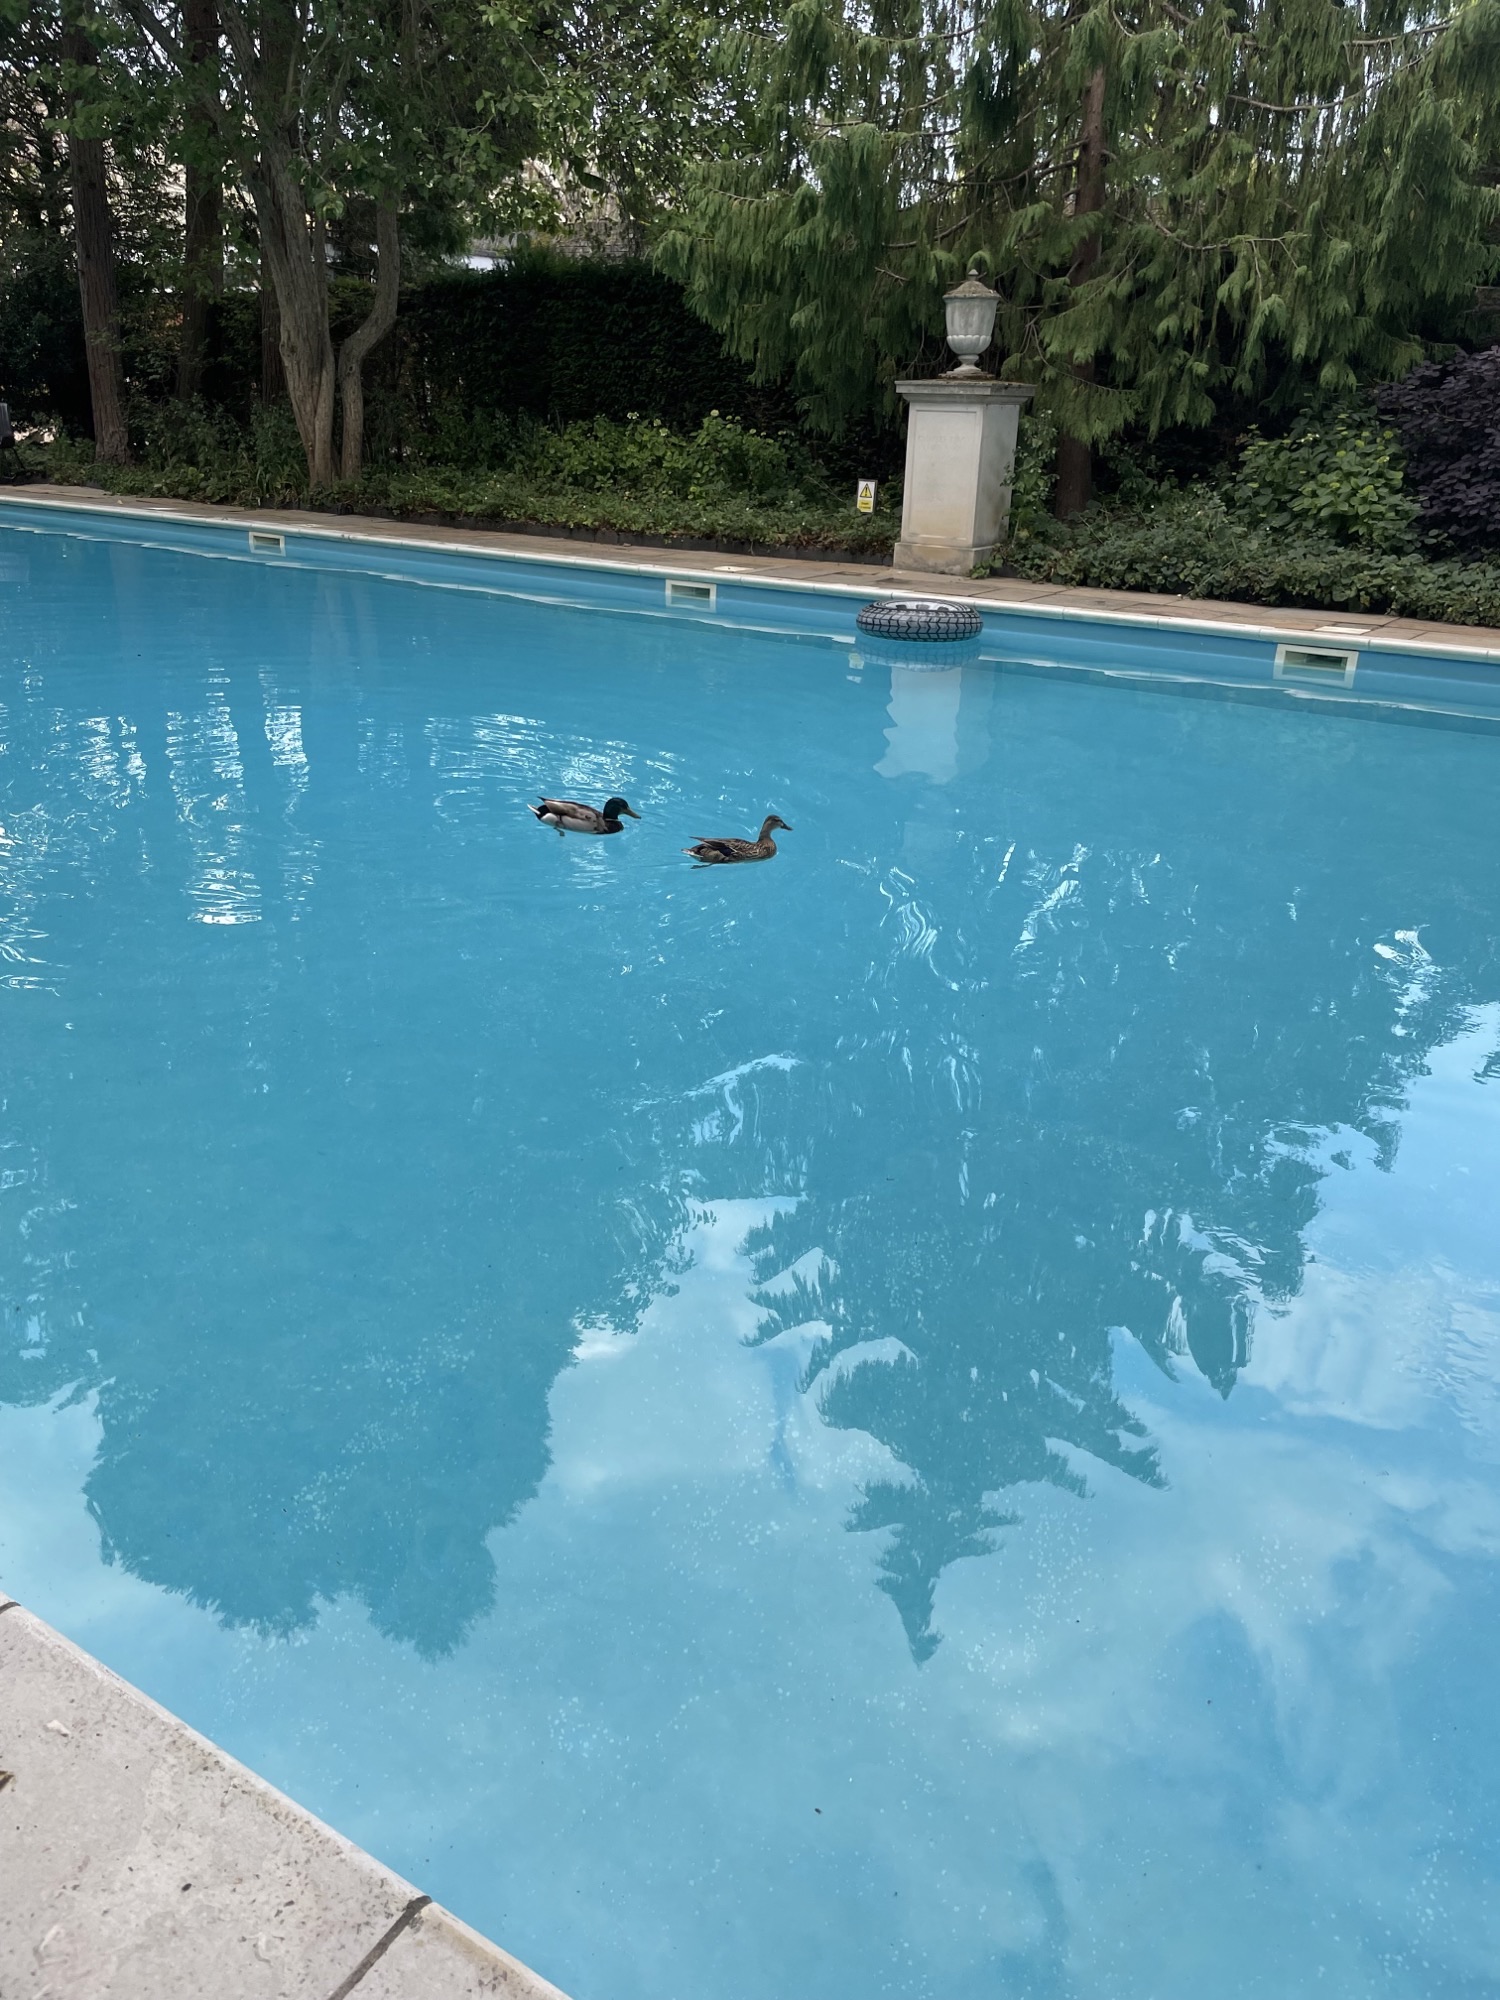 College pool, with two ducks swimming in it and a statue in the background